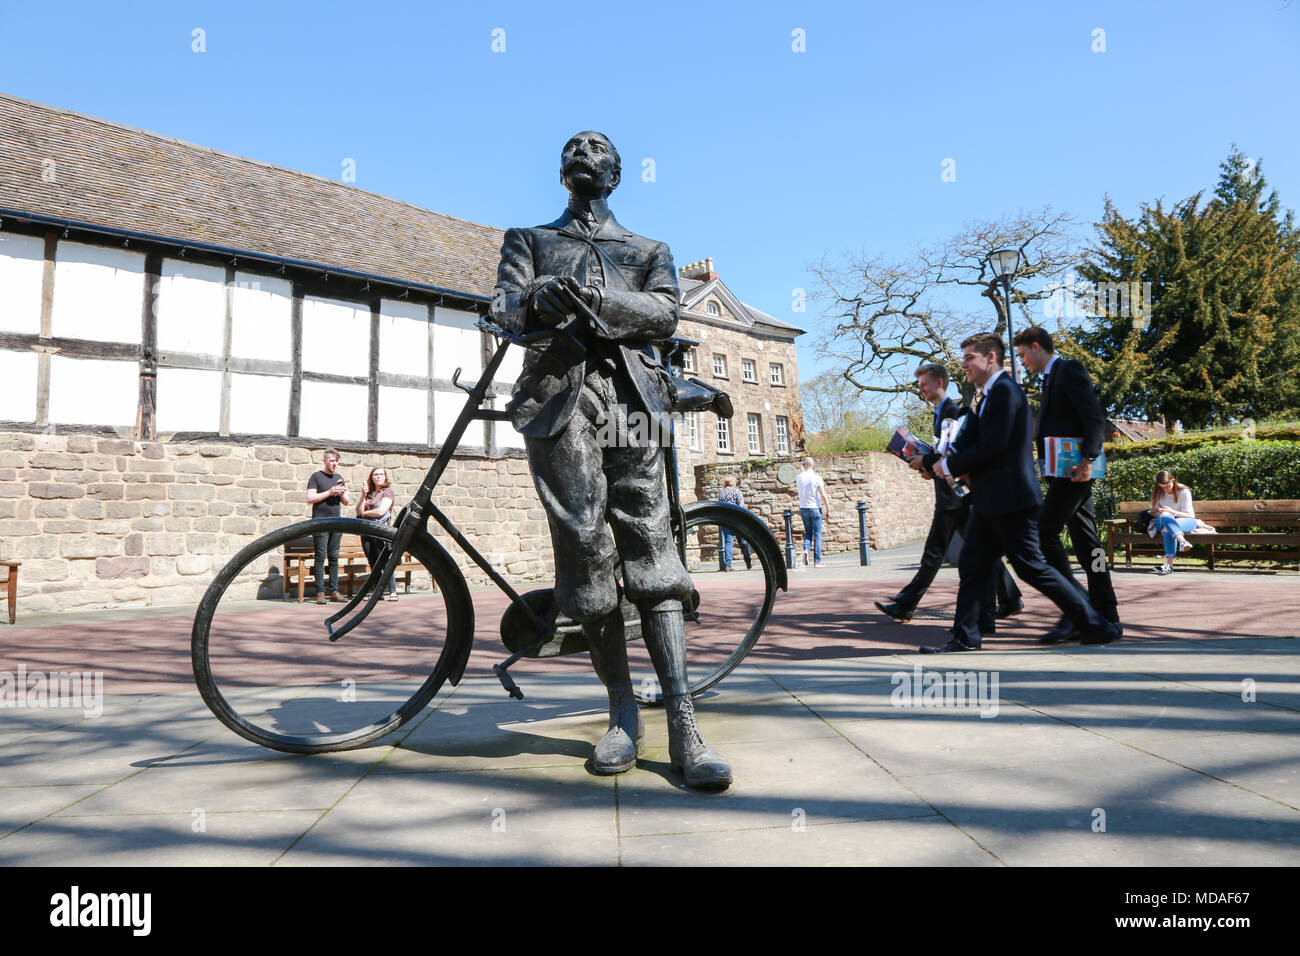 Edward Elgar appears to be enjoying the sun outside Hereford cathedral. Stock Photo